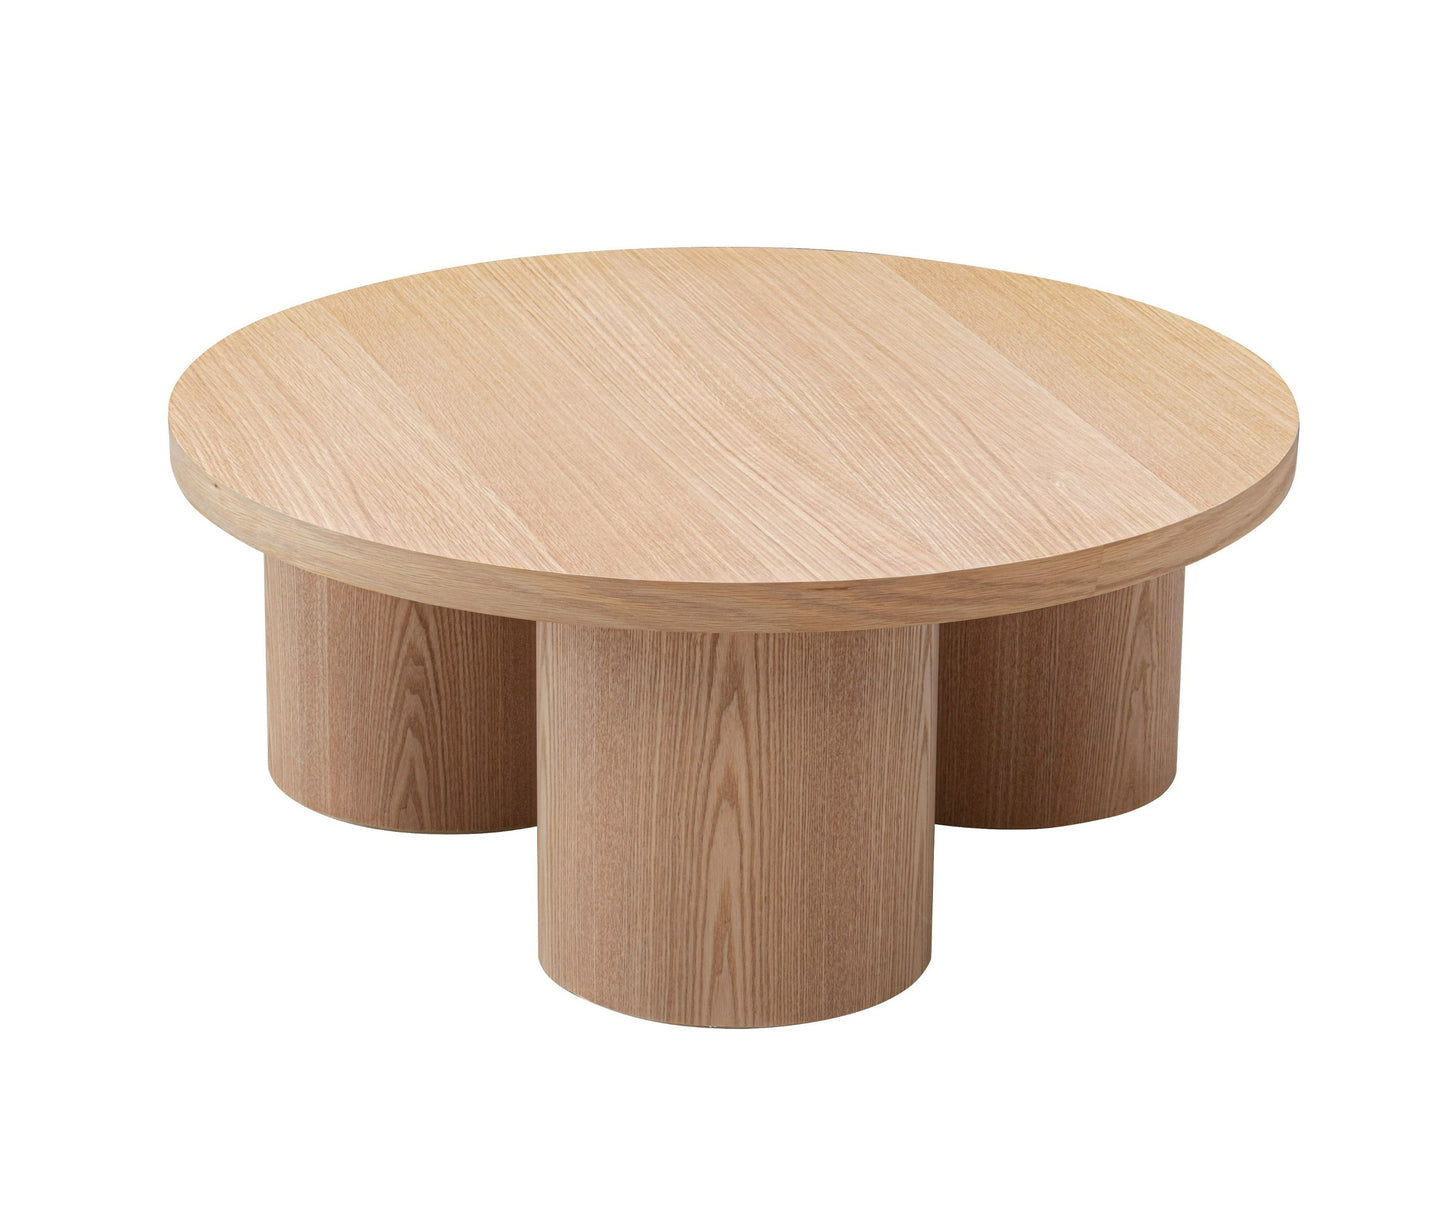 Modrest Babson - Modern Natural Oak Round Coffee Table